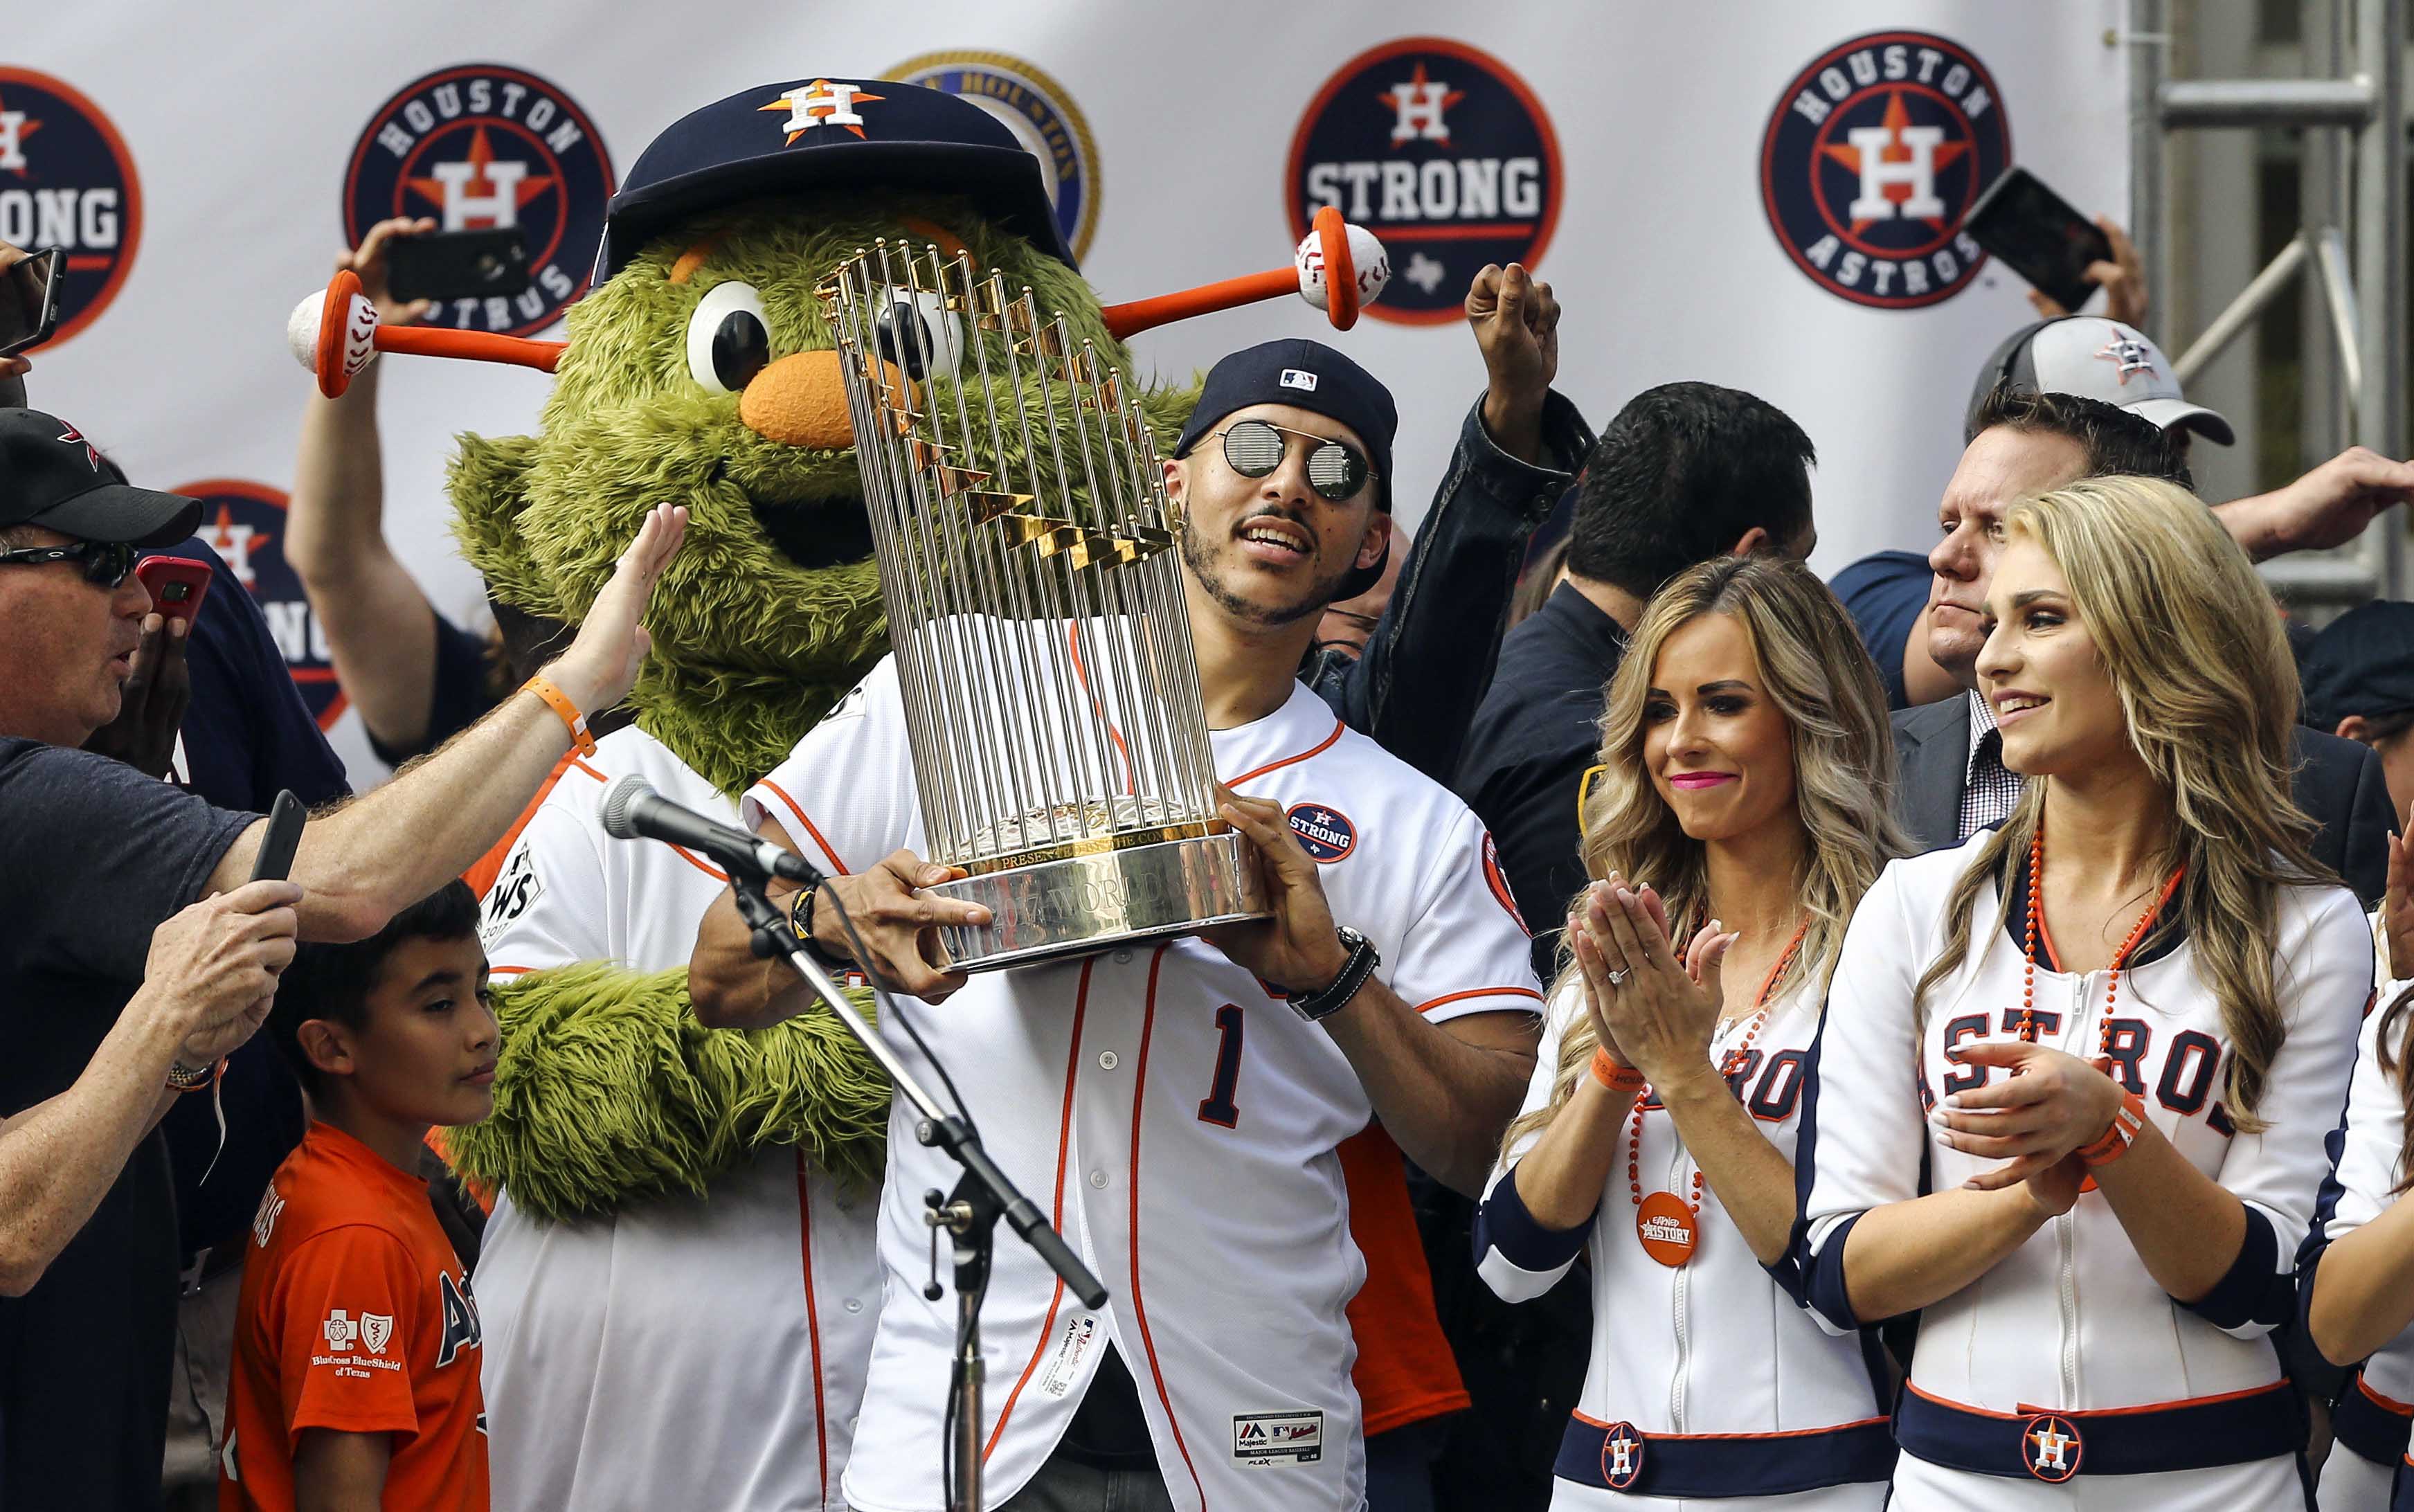 The Astros World Series trophy is coming to San Antonio on